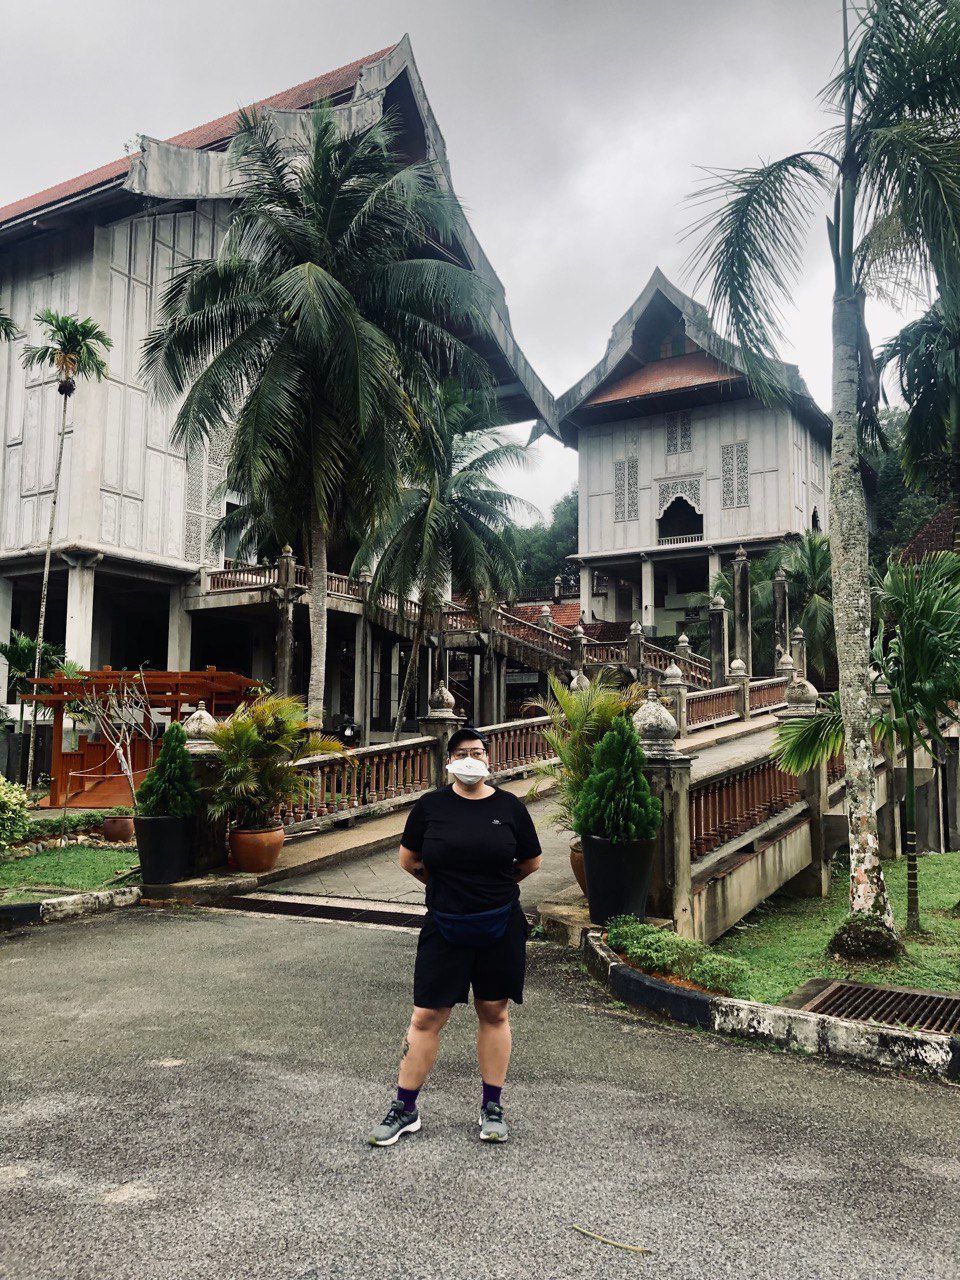 Me wearing a face mask, dressed in black tshirt and shorts, standing in front of the Terengganu state museum ramp. The building is made of several tall white traditional Malay archicture.